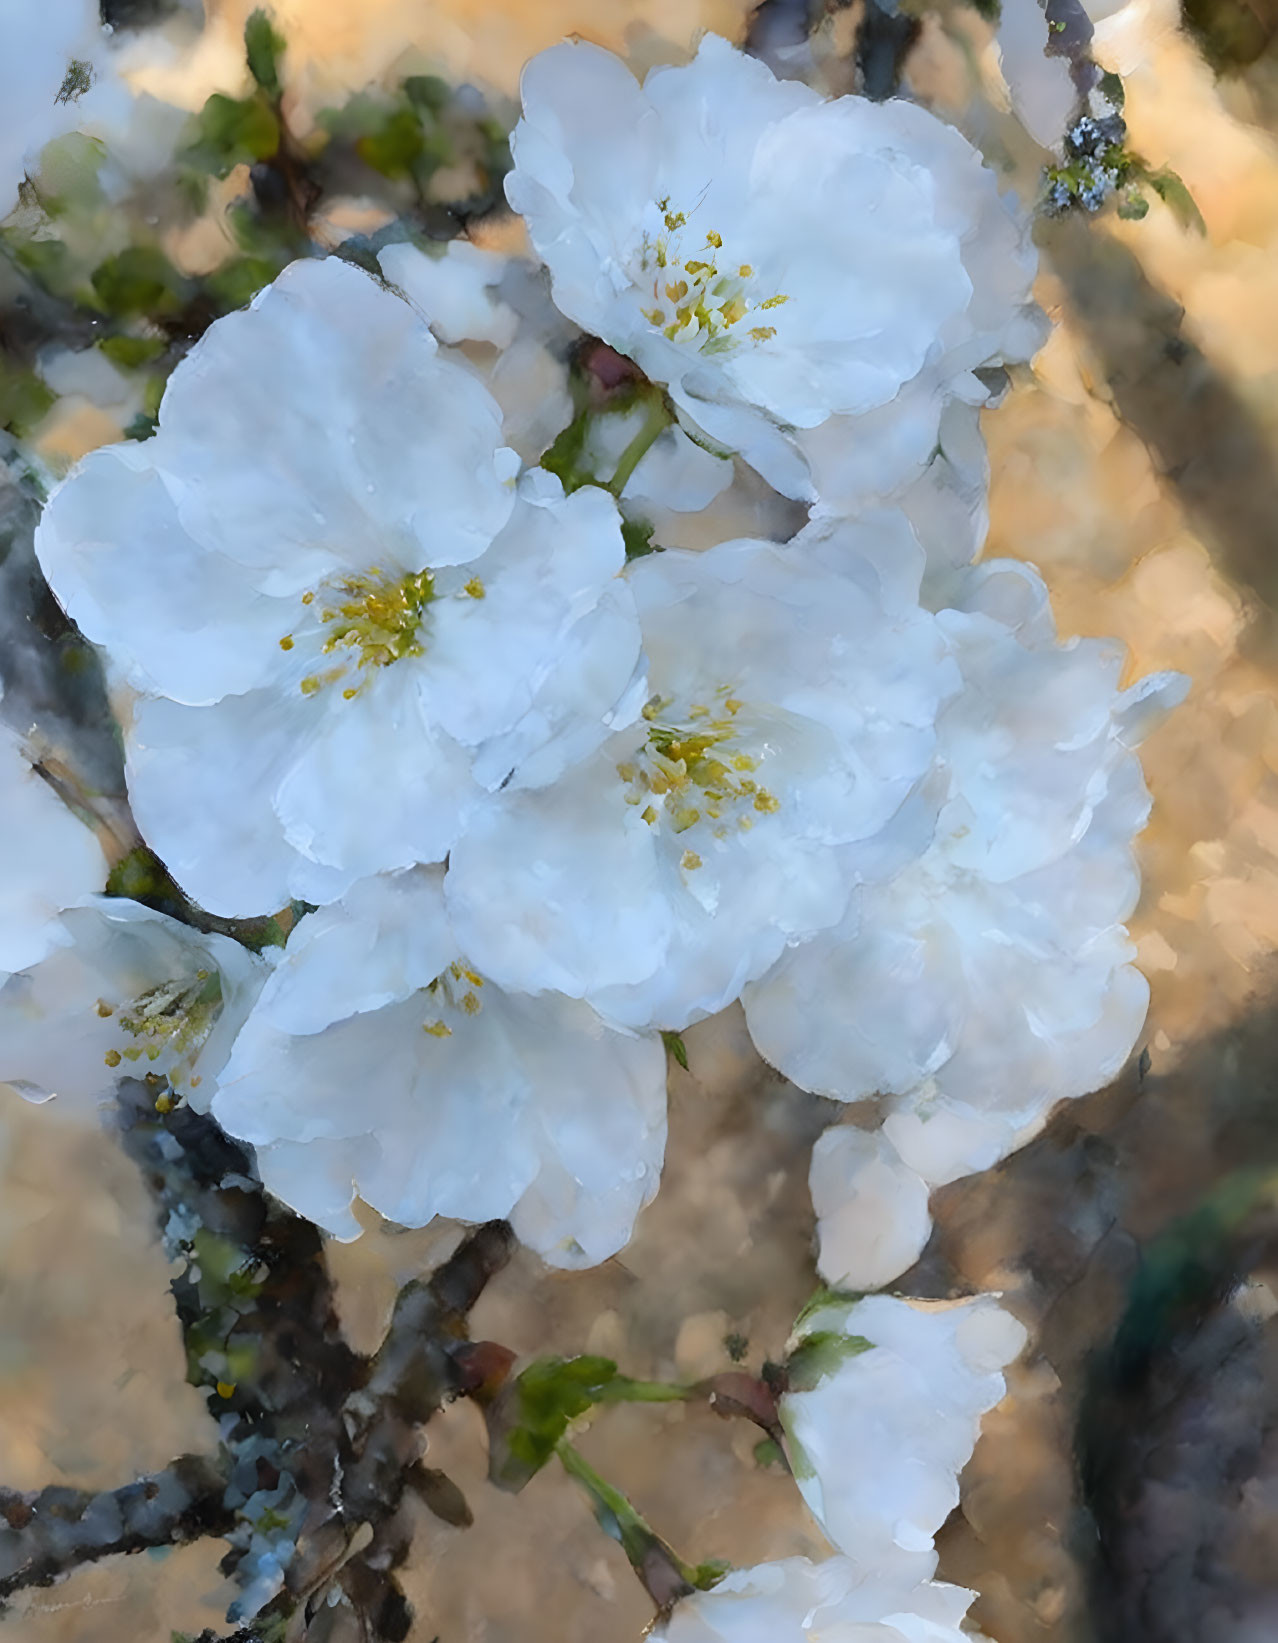 Cluster of White Blossoms with Yellow Centers on Blurred Background